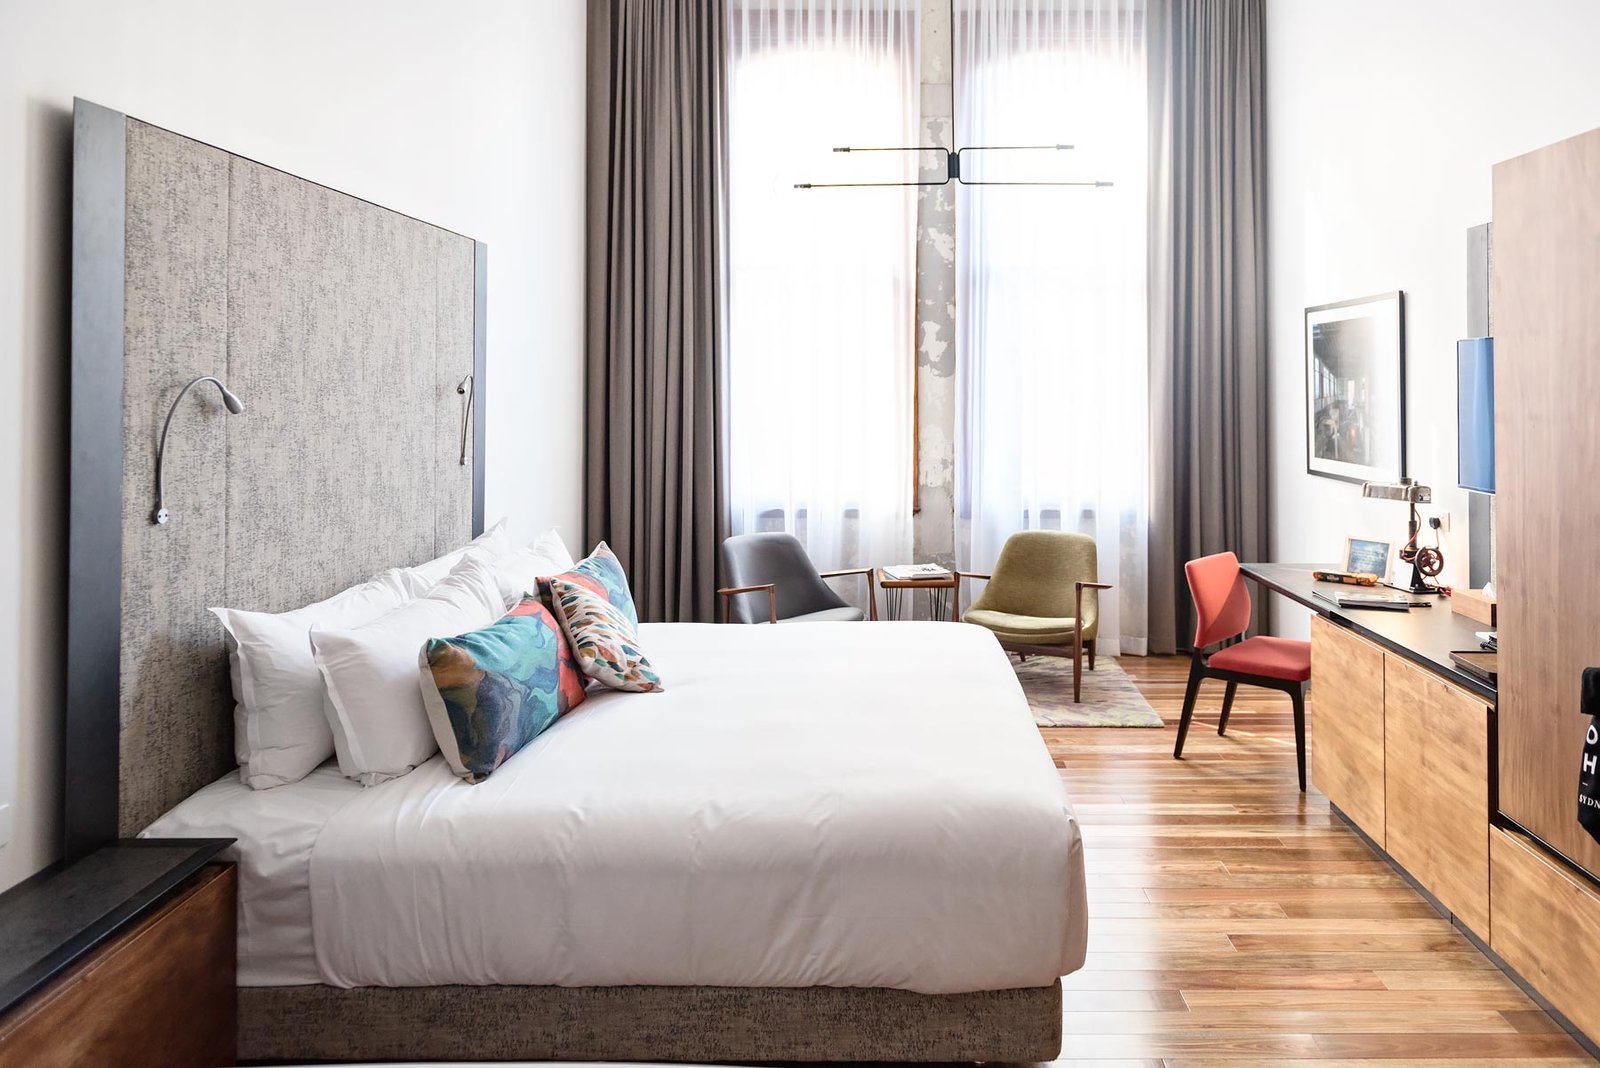 10 tricks to turn your bedroom into your favourite boutique hotel - Inspiration from the Old Clare Hotel in Sydney